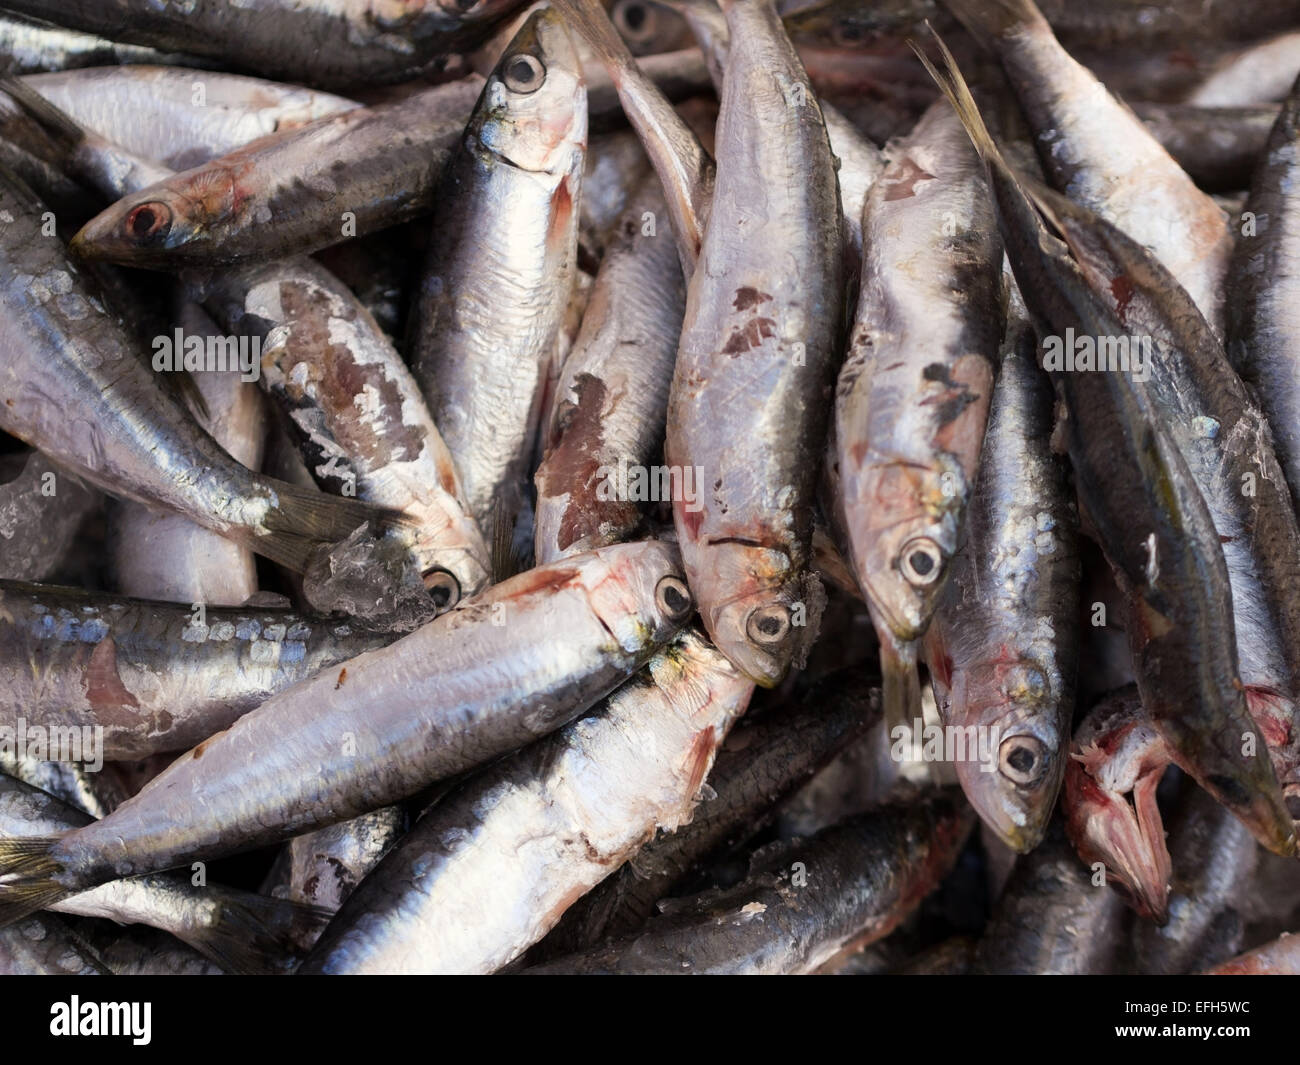 Smelly old anchovies fish close up Stock Photo